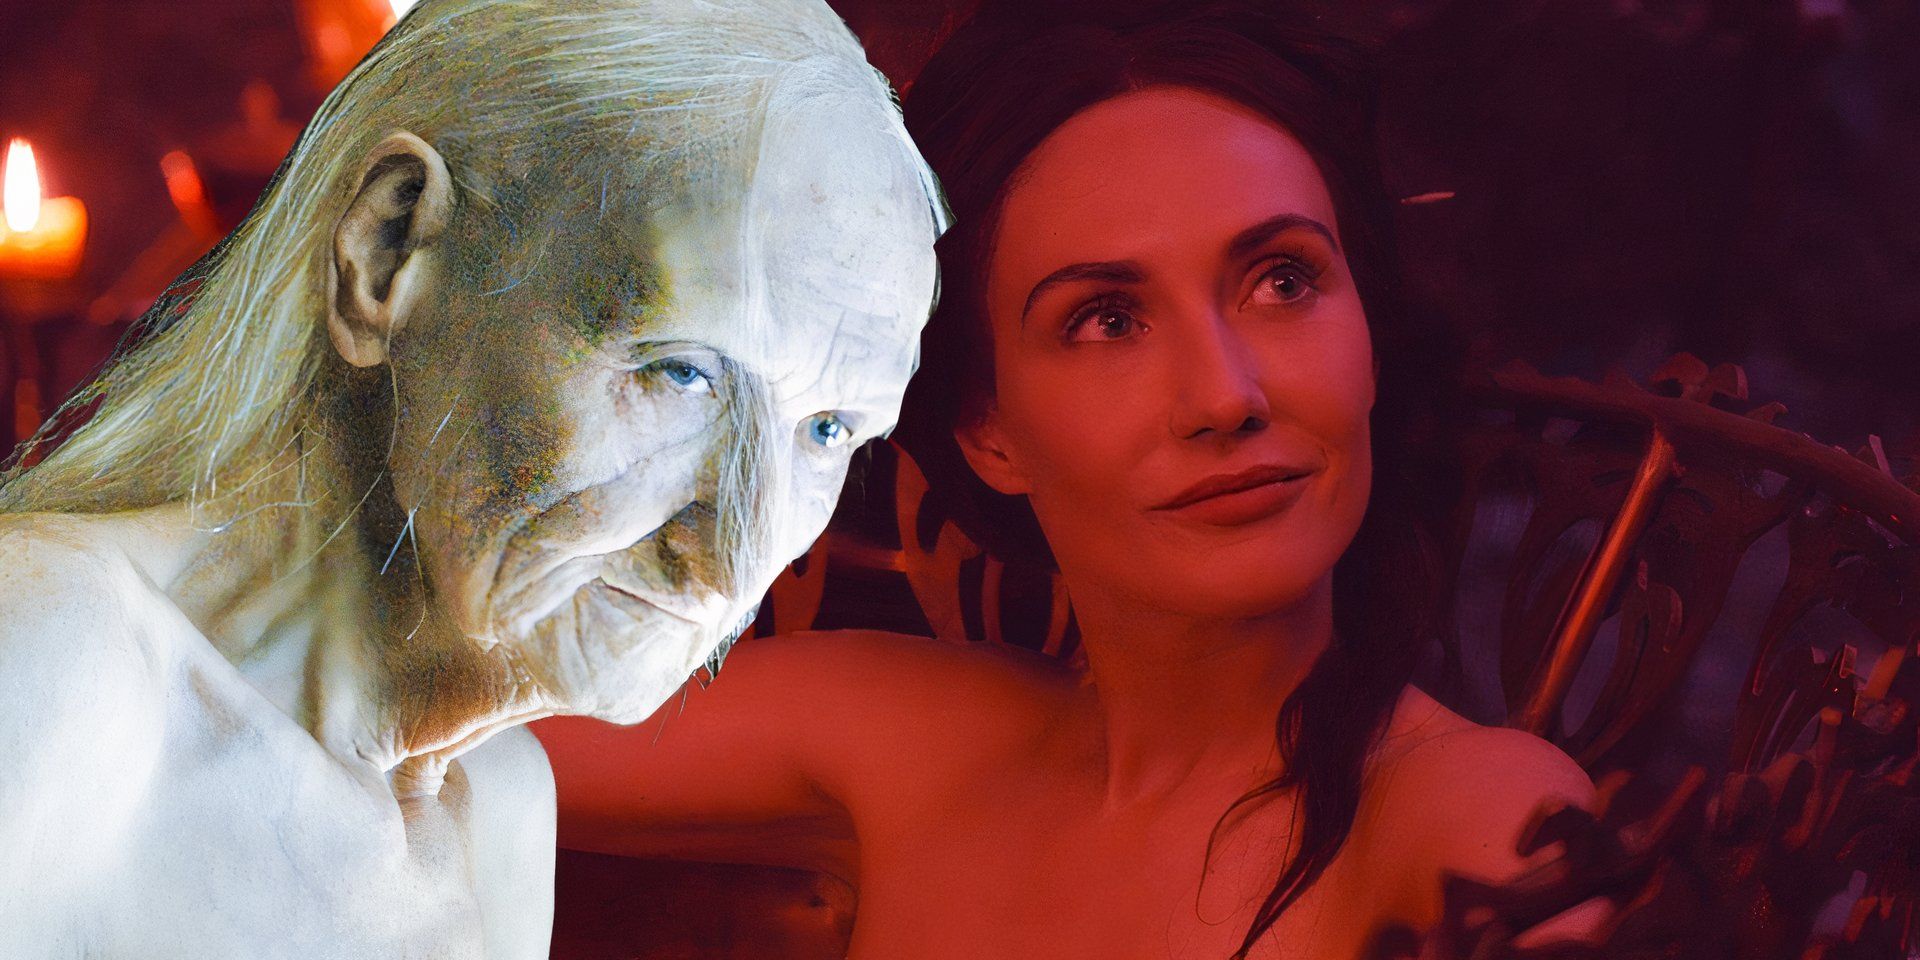 Collage of Melisandre both young and old in Game of Thrones